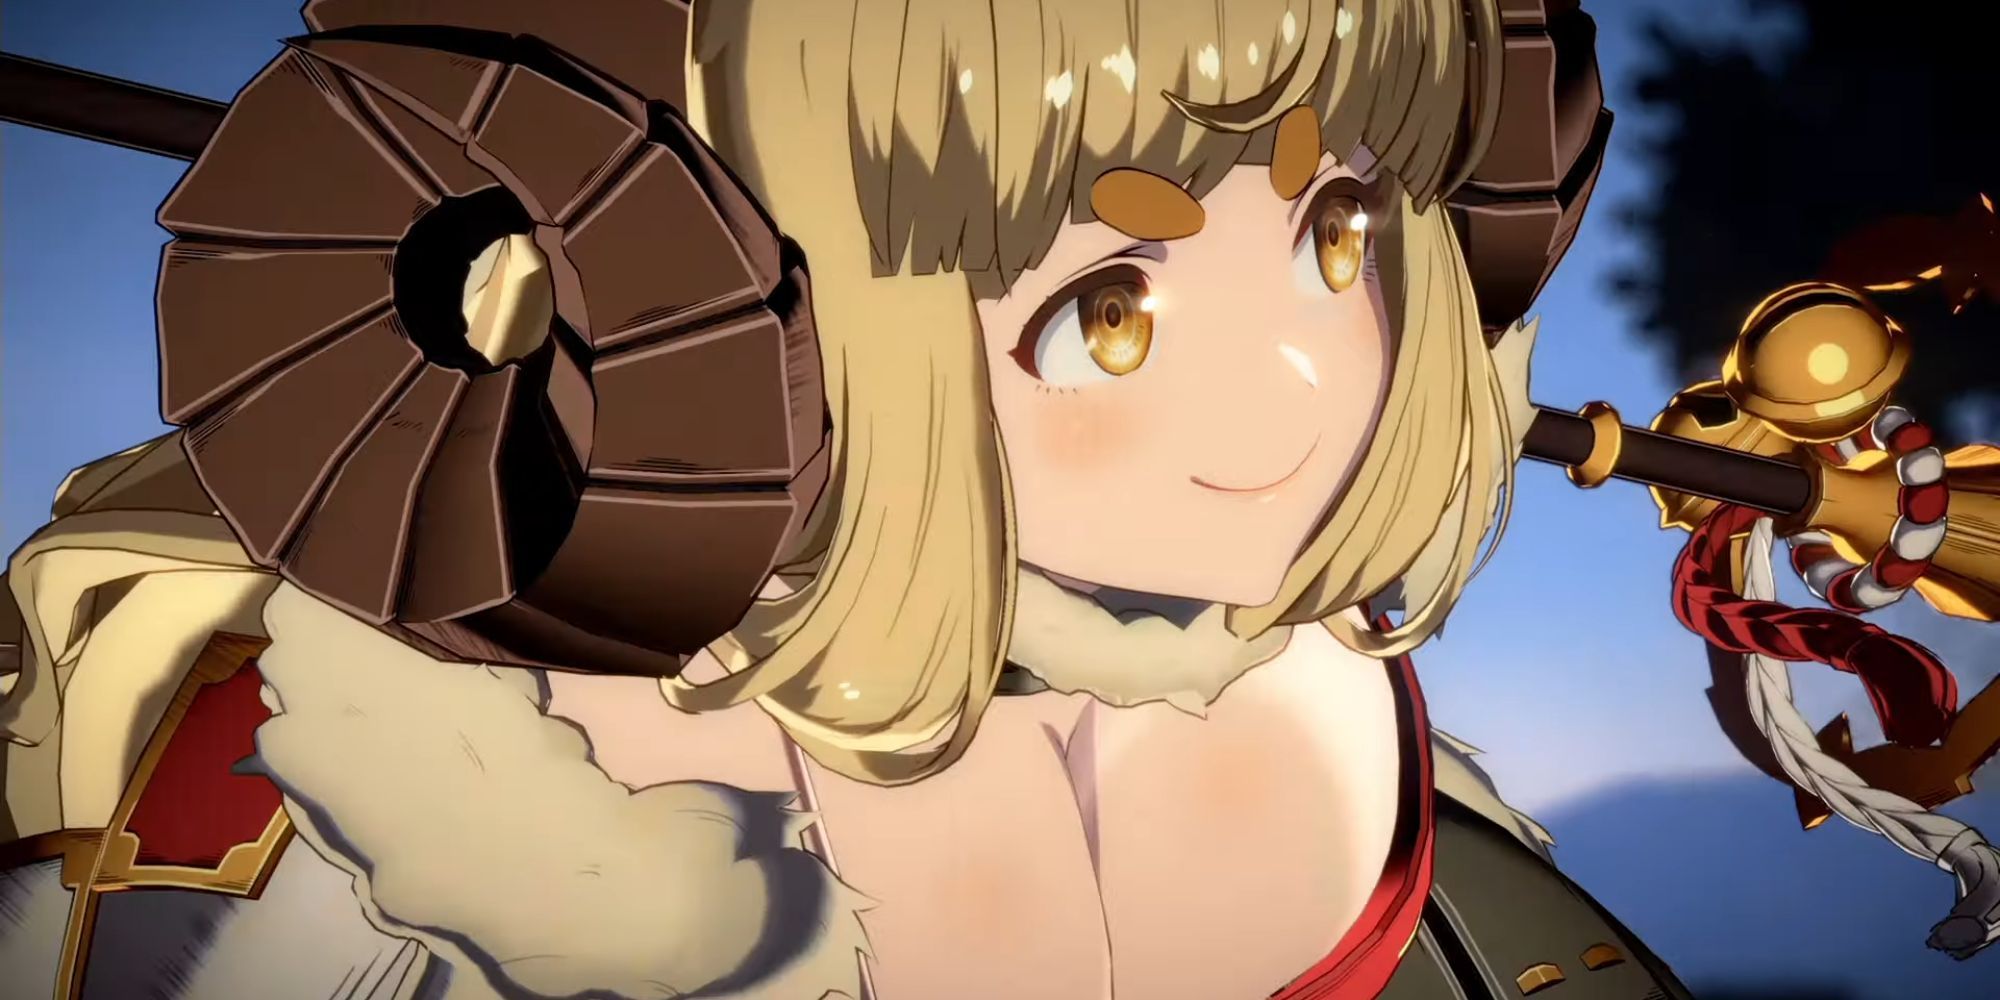 GRANBLUE FANTASY VERSUS Review: A Fighter For All Skill Levels! — GameTyrant